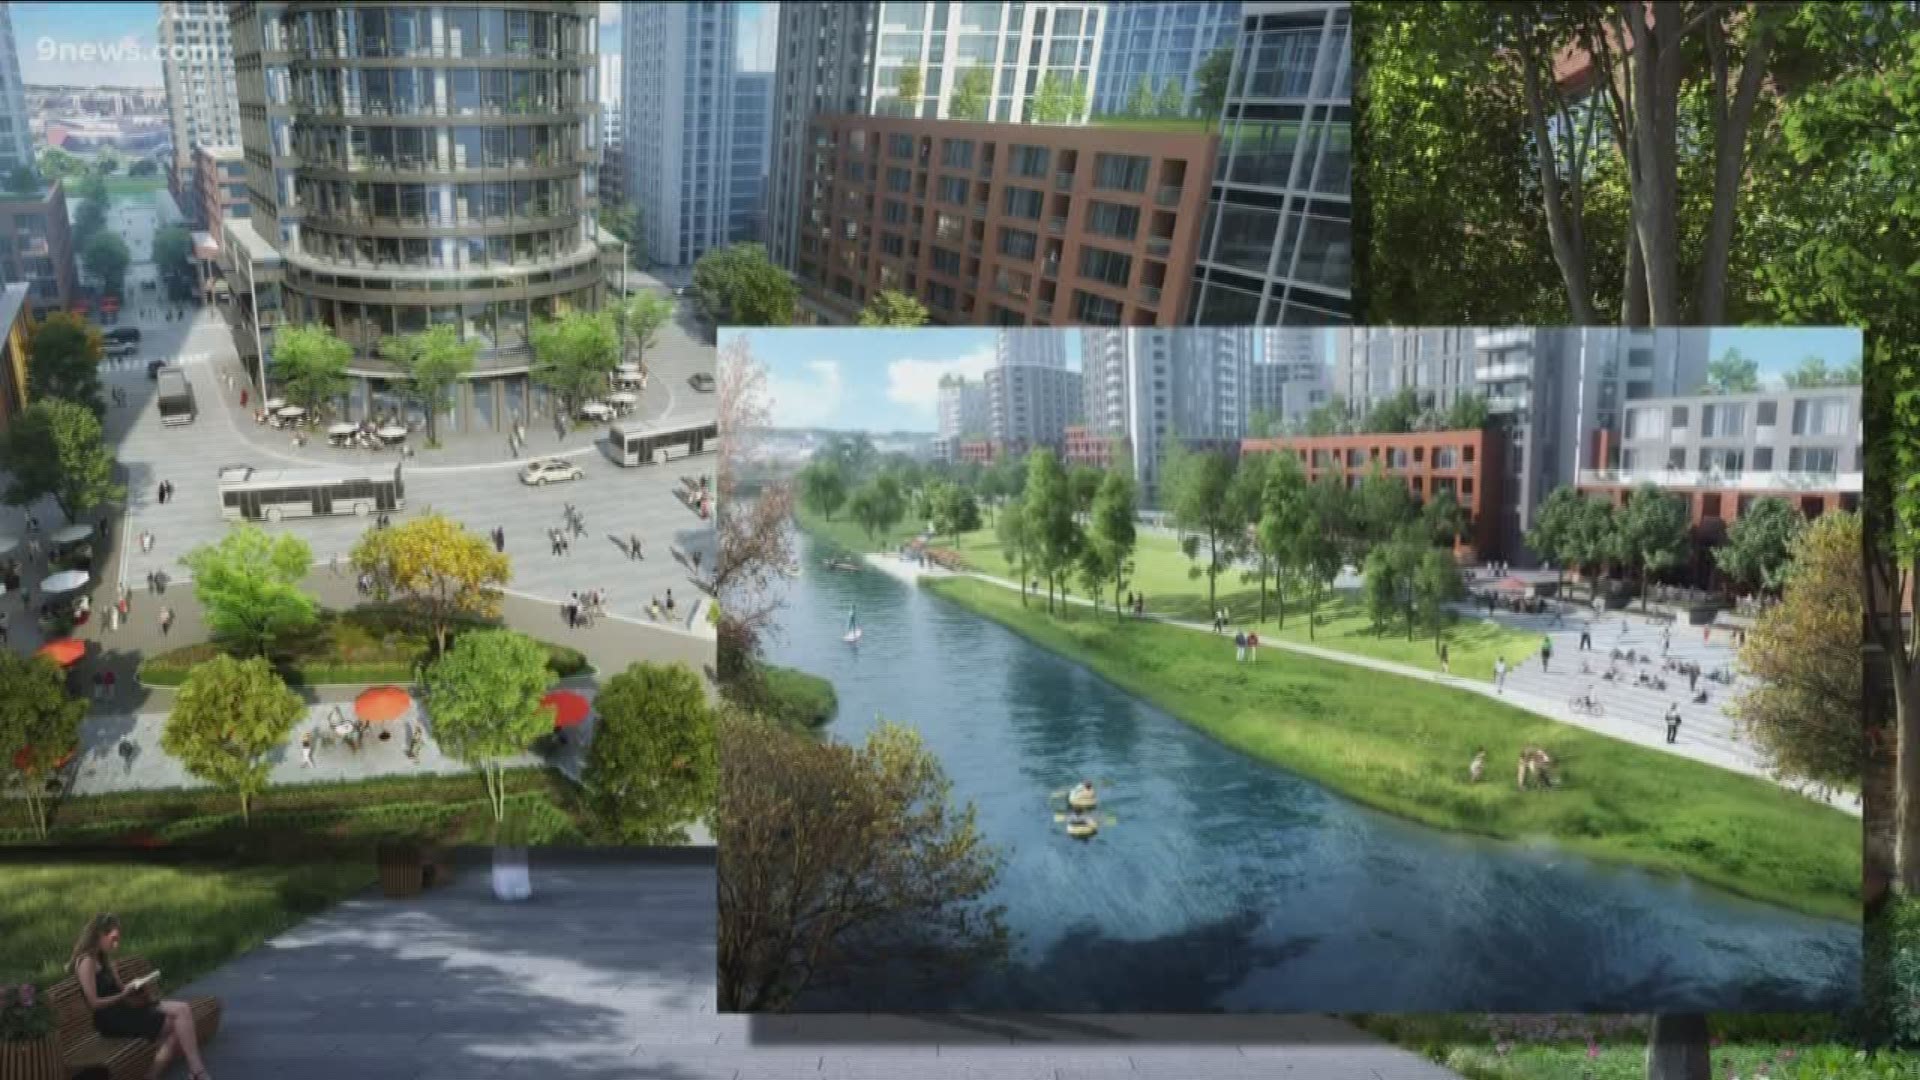 Developers hope to break ground on the project along the South Platte River in Denver in the next 18 months.